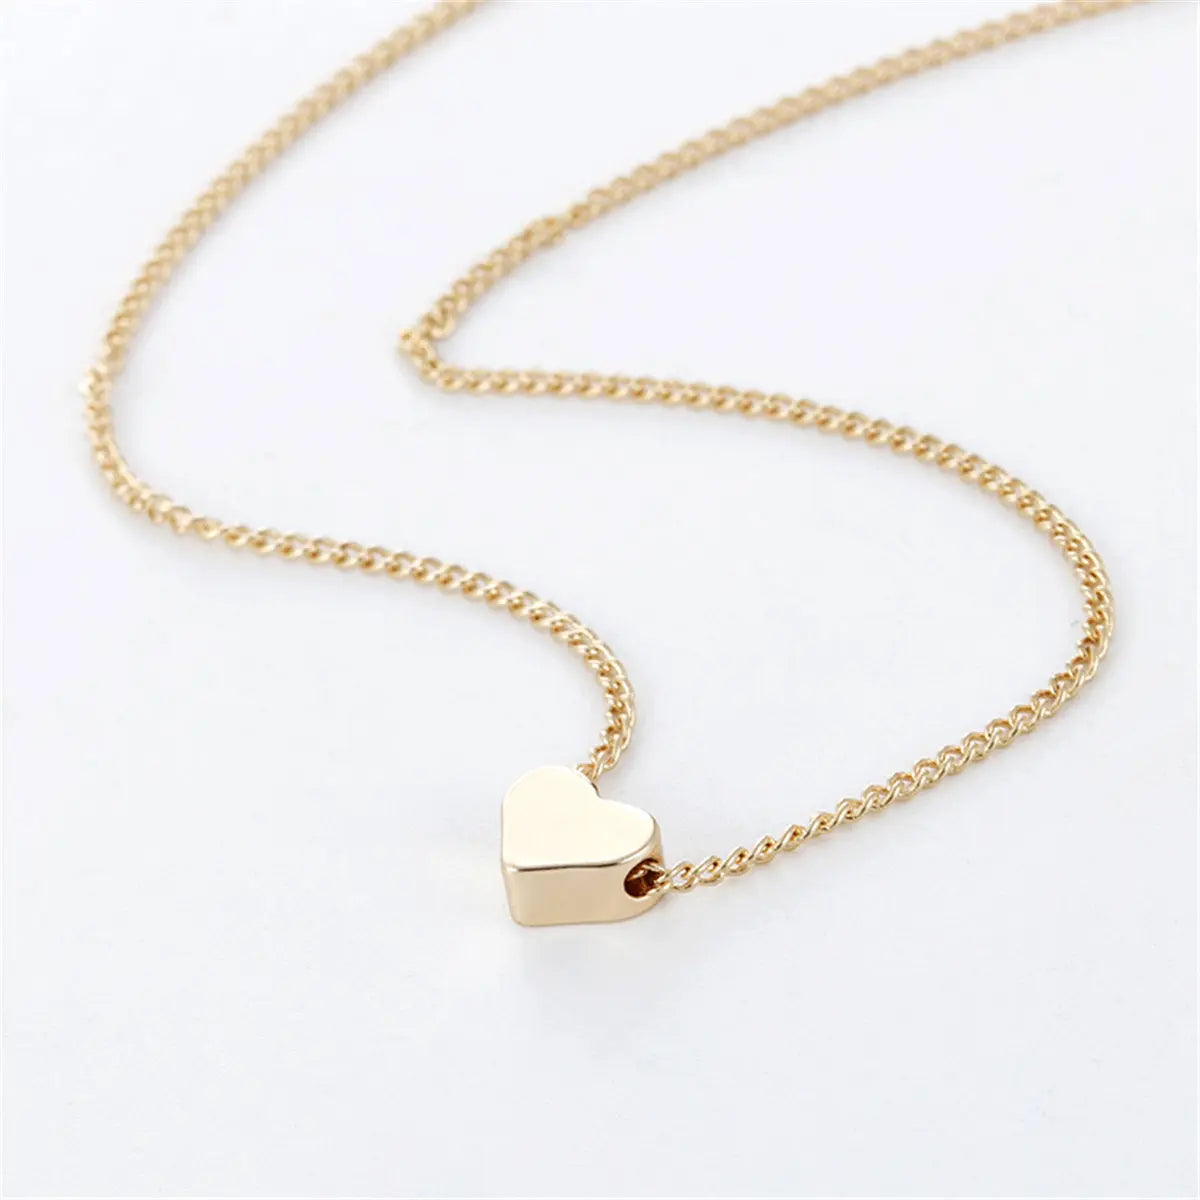 Simple Fashion Gold Color Double-sided Love Pendant Necklaces Clavicle Chains Necklace Women Jewelry Valentines Day Gift - Trending's Arena Beauty Simple Fashion Gold Color Double-sided Love Pendant Necklaces Clavicle Chains Necklace Women Jewelry Valentines Day Gift Electronics Facial & Neck Gold